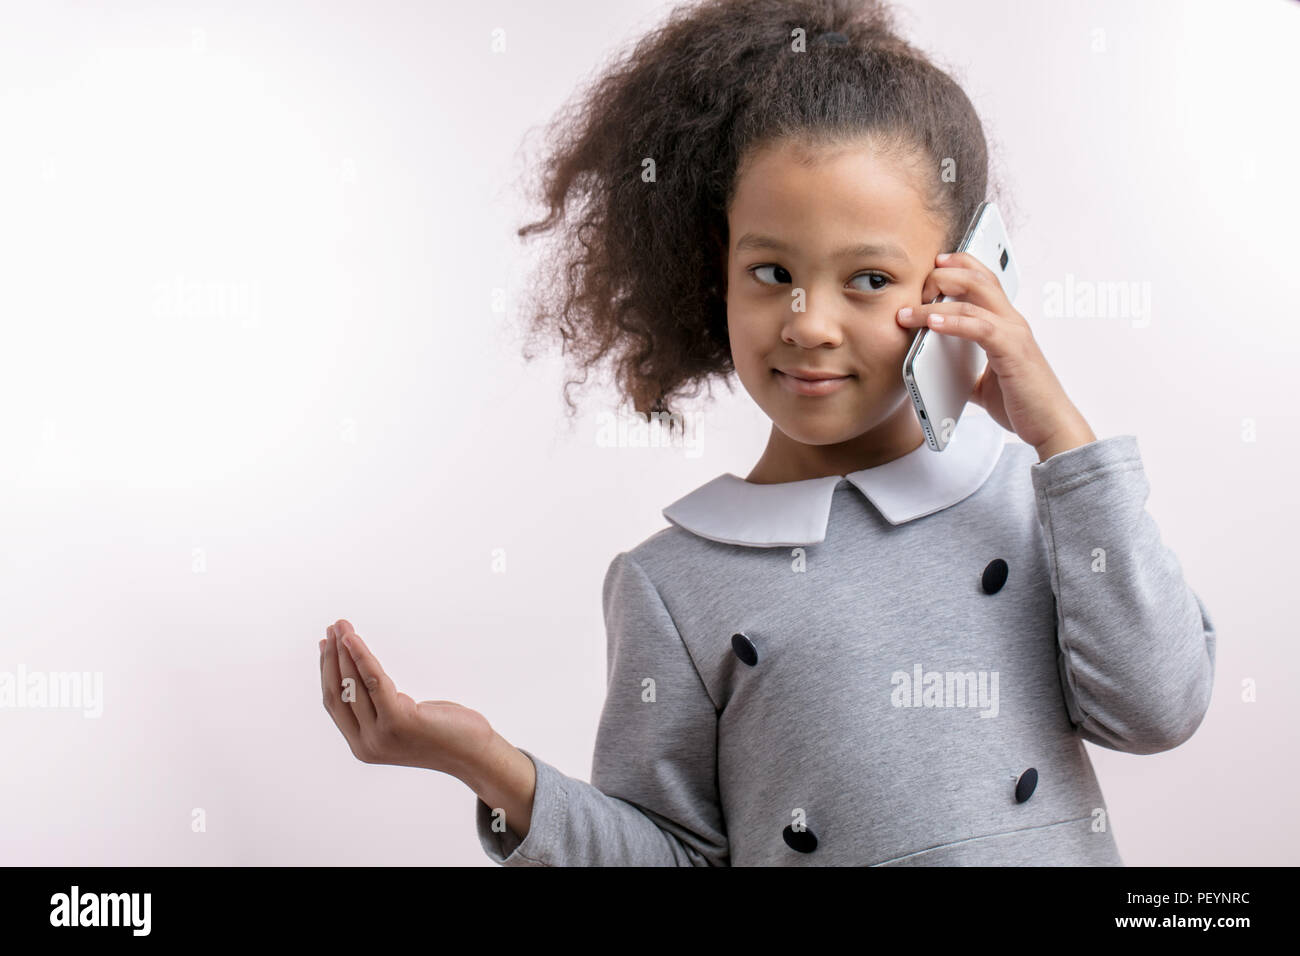 ethicity concept. beautiful lettle girl is talking on the smart phone with a friend.modern technologies Stock Photo